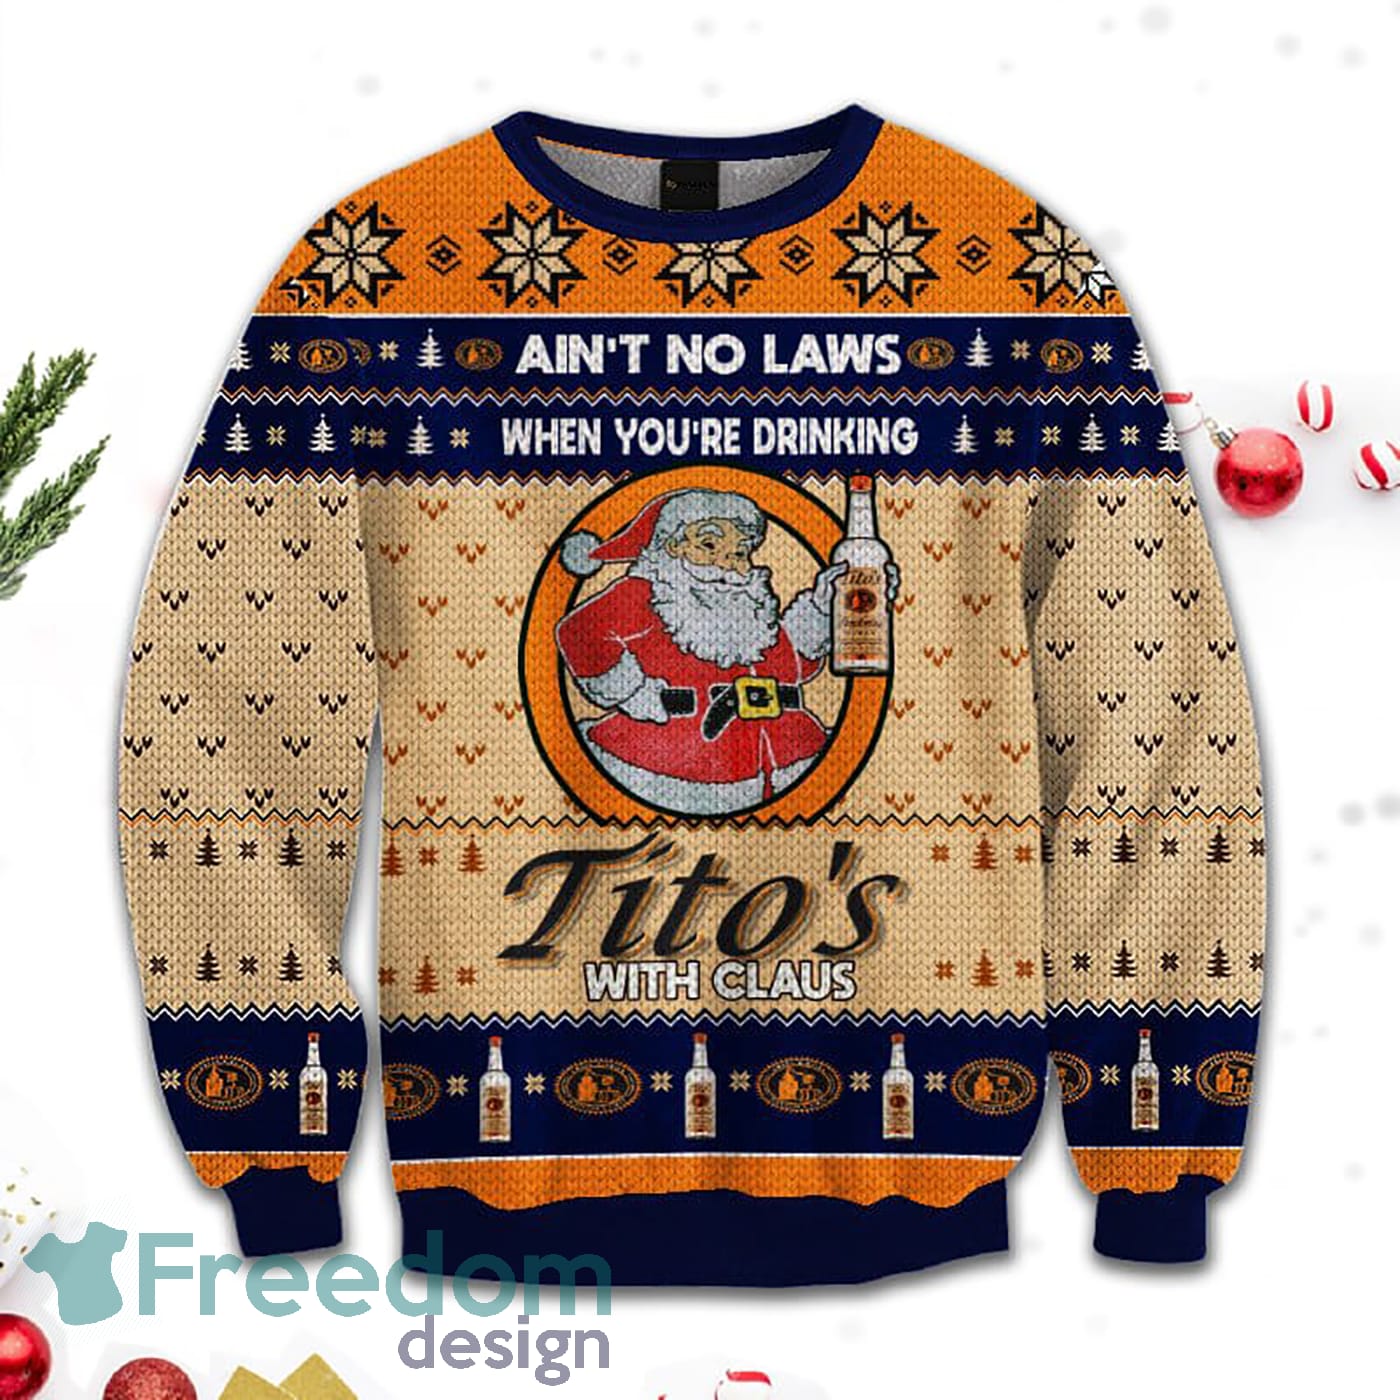 Merr Christmas Ain't No Laws When You Drink Tito's Vodka With Claus Sweatshirt